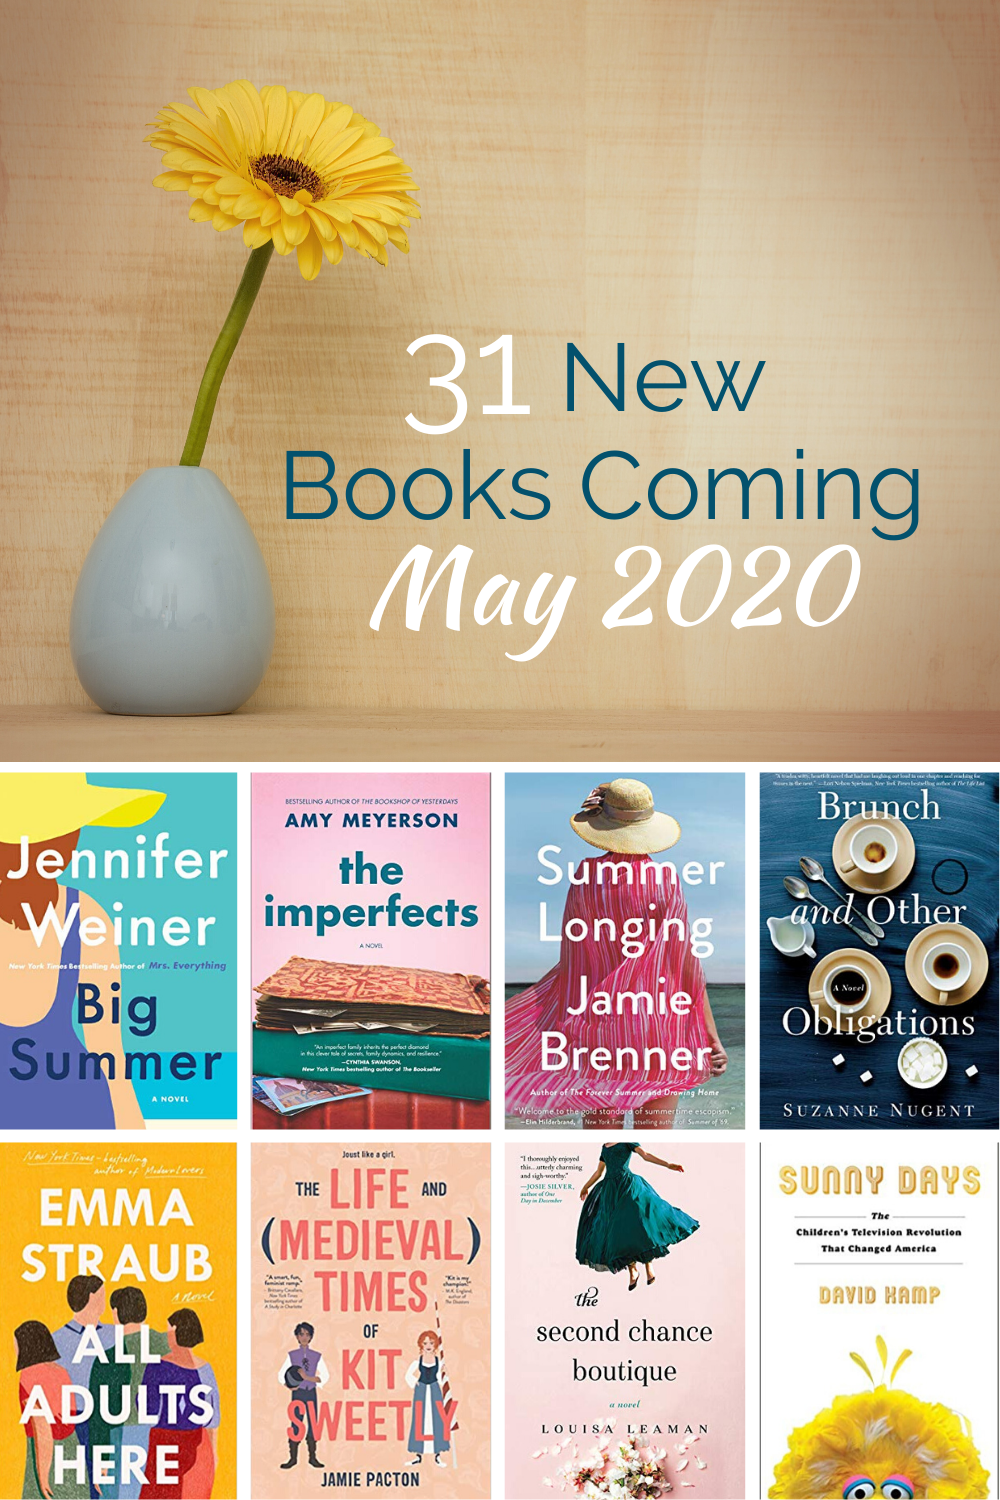 31 New books for May 2020. We have been able to get our hands on a few of these and they are great! So, sit back, take some time to relax and read. After all, being stuck inside has to have some perks right?